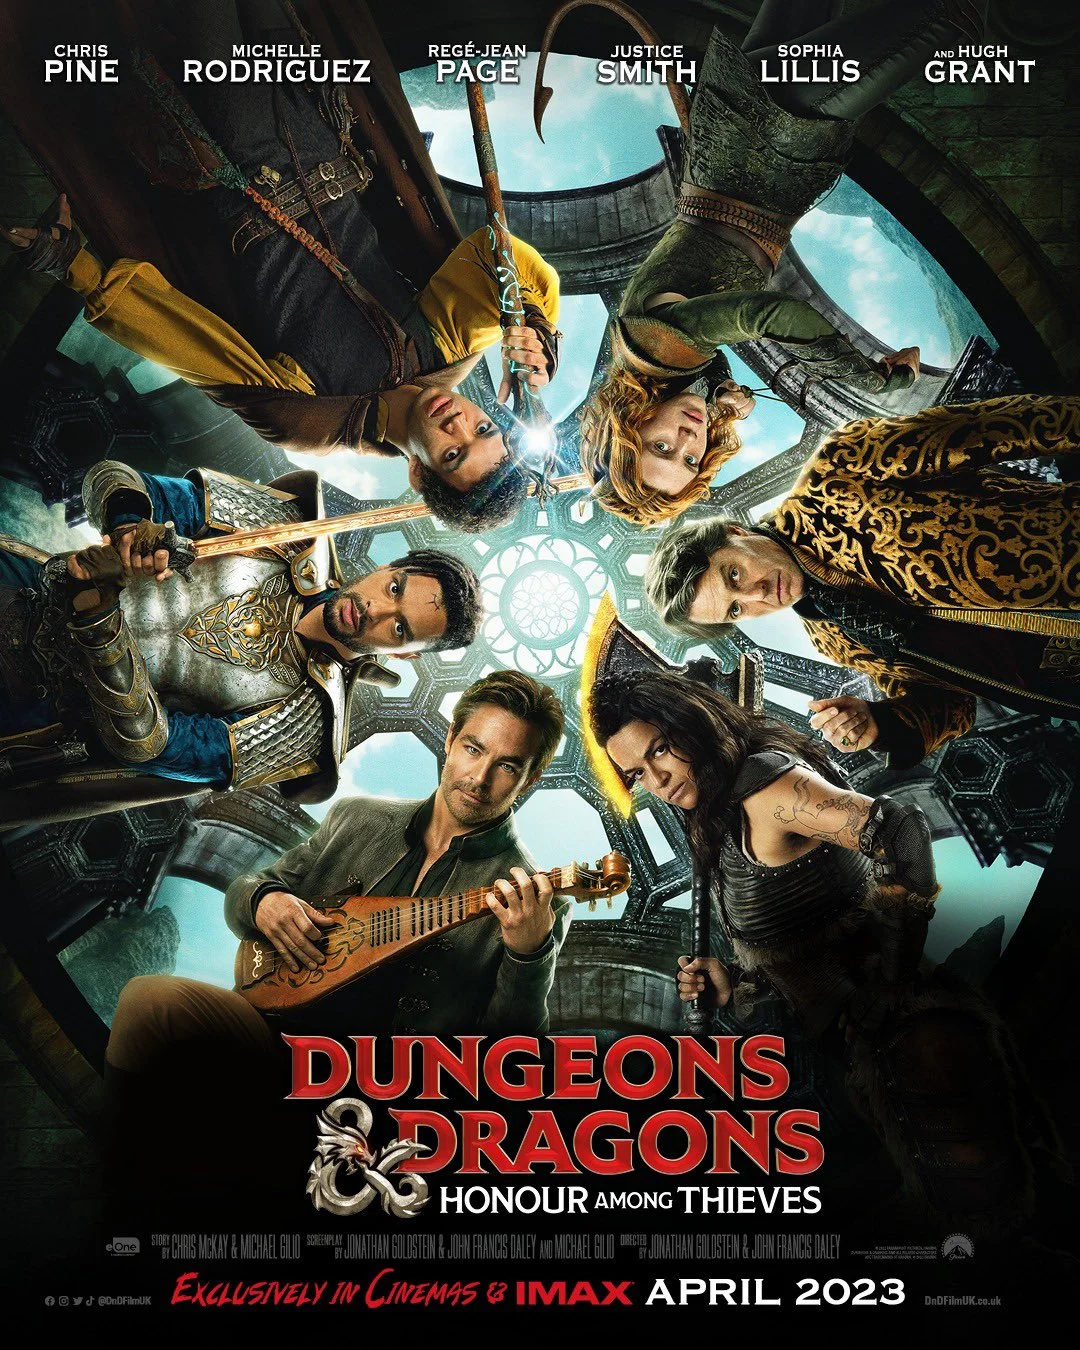 The official cinematic poster for Dungeons & Dragons: Honor Among Thieves (2023), Paramount Pictures